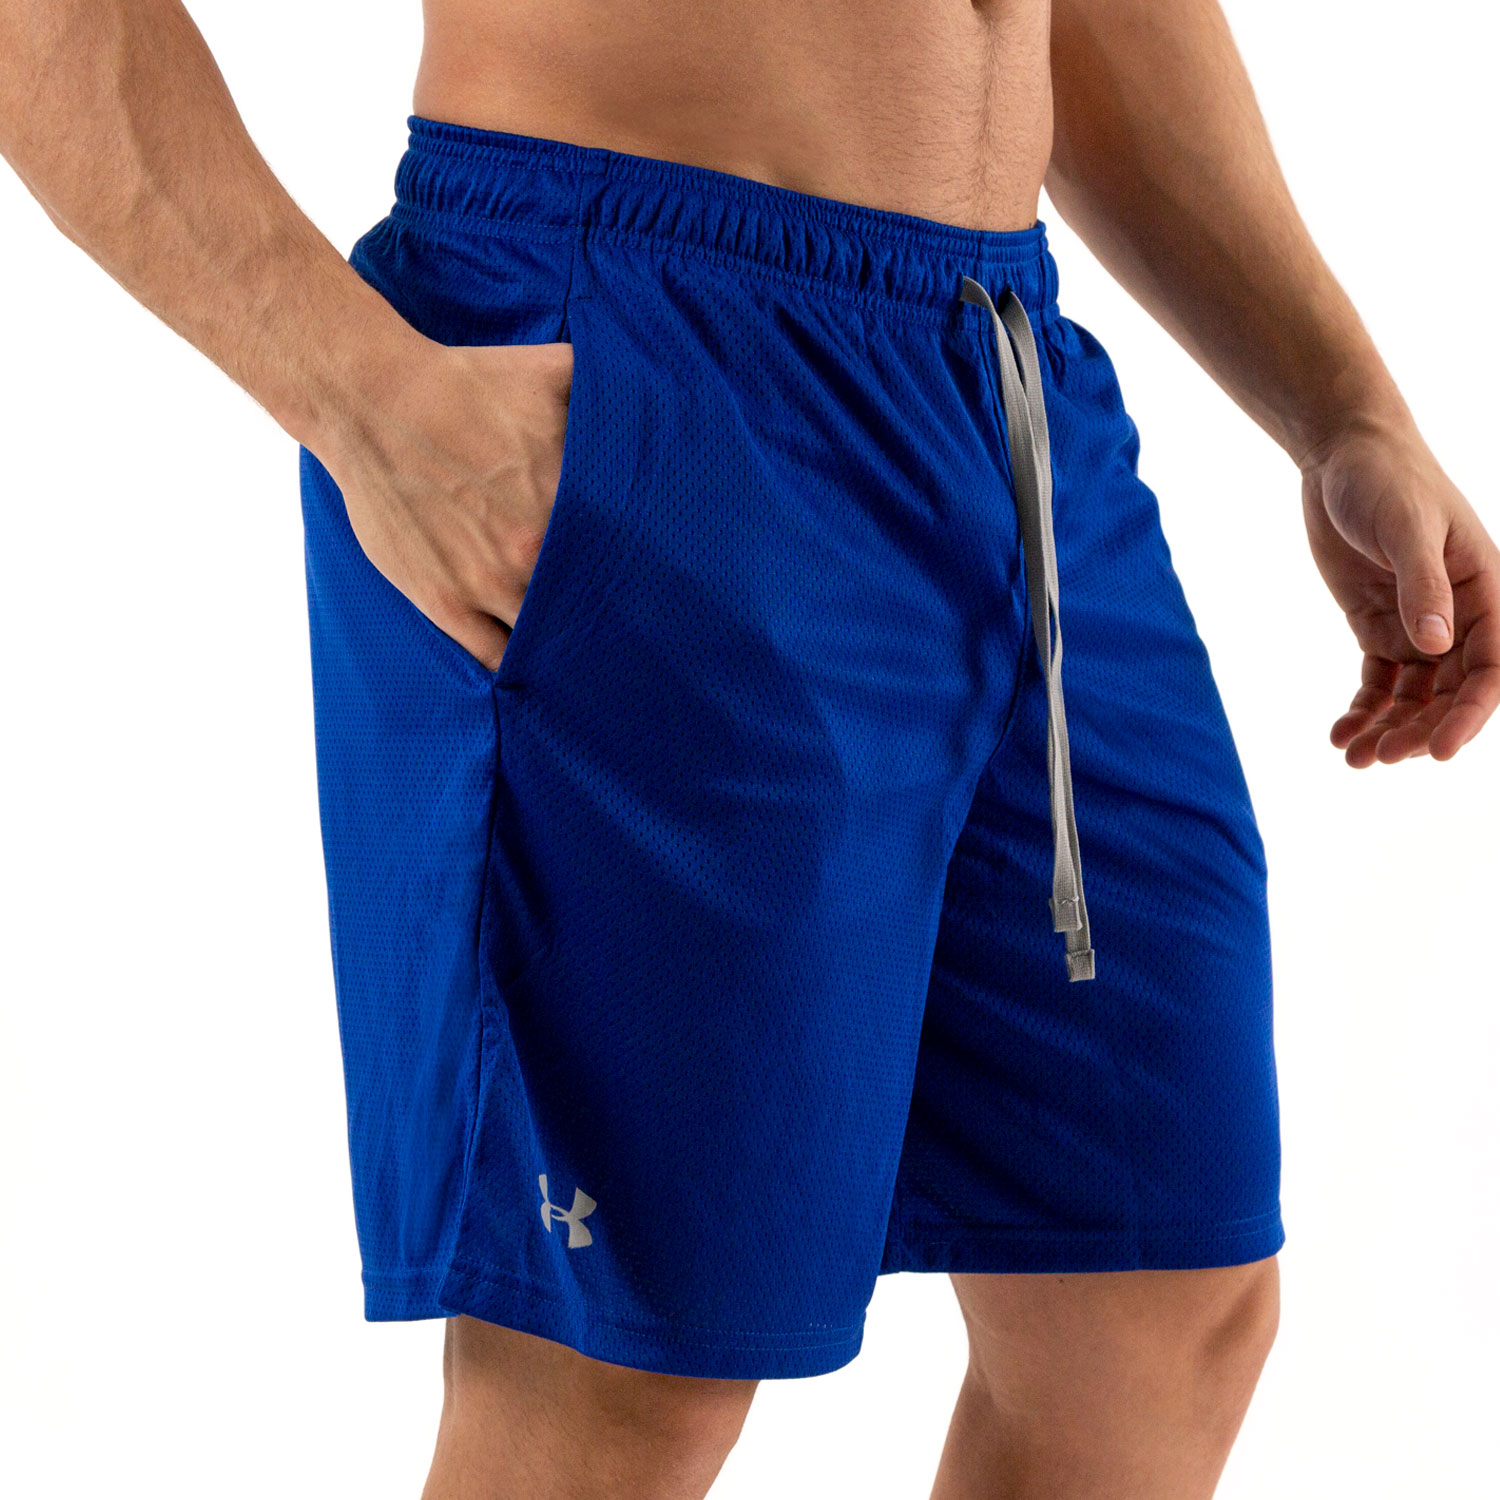 Under Armour Tech Mesh 9in Shorts - Royal